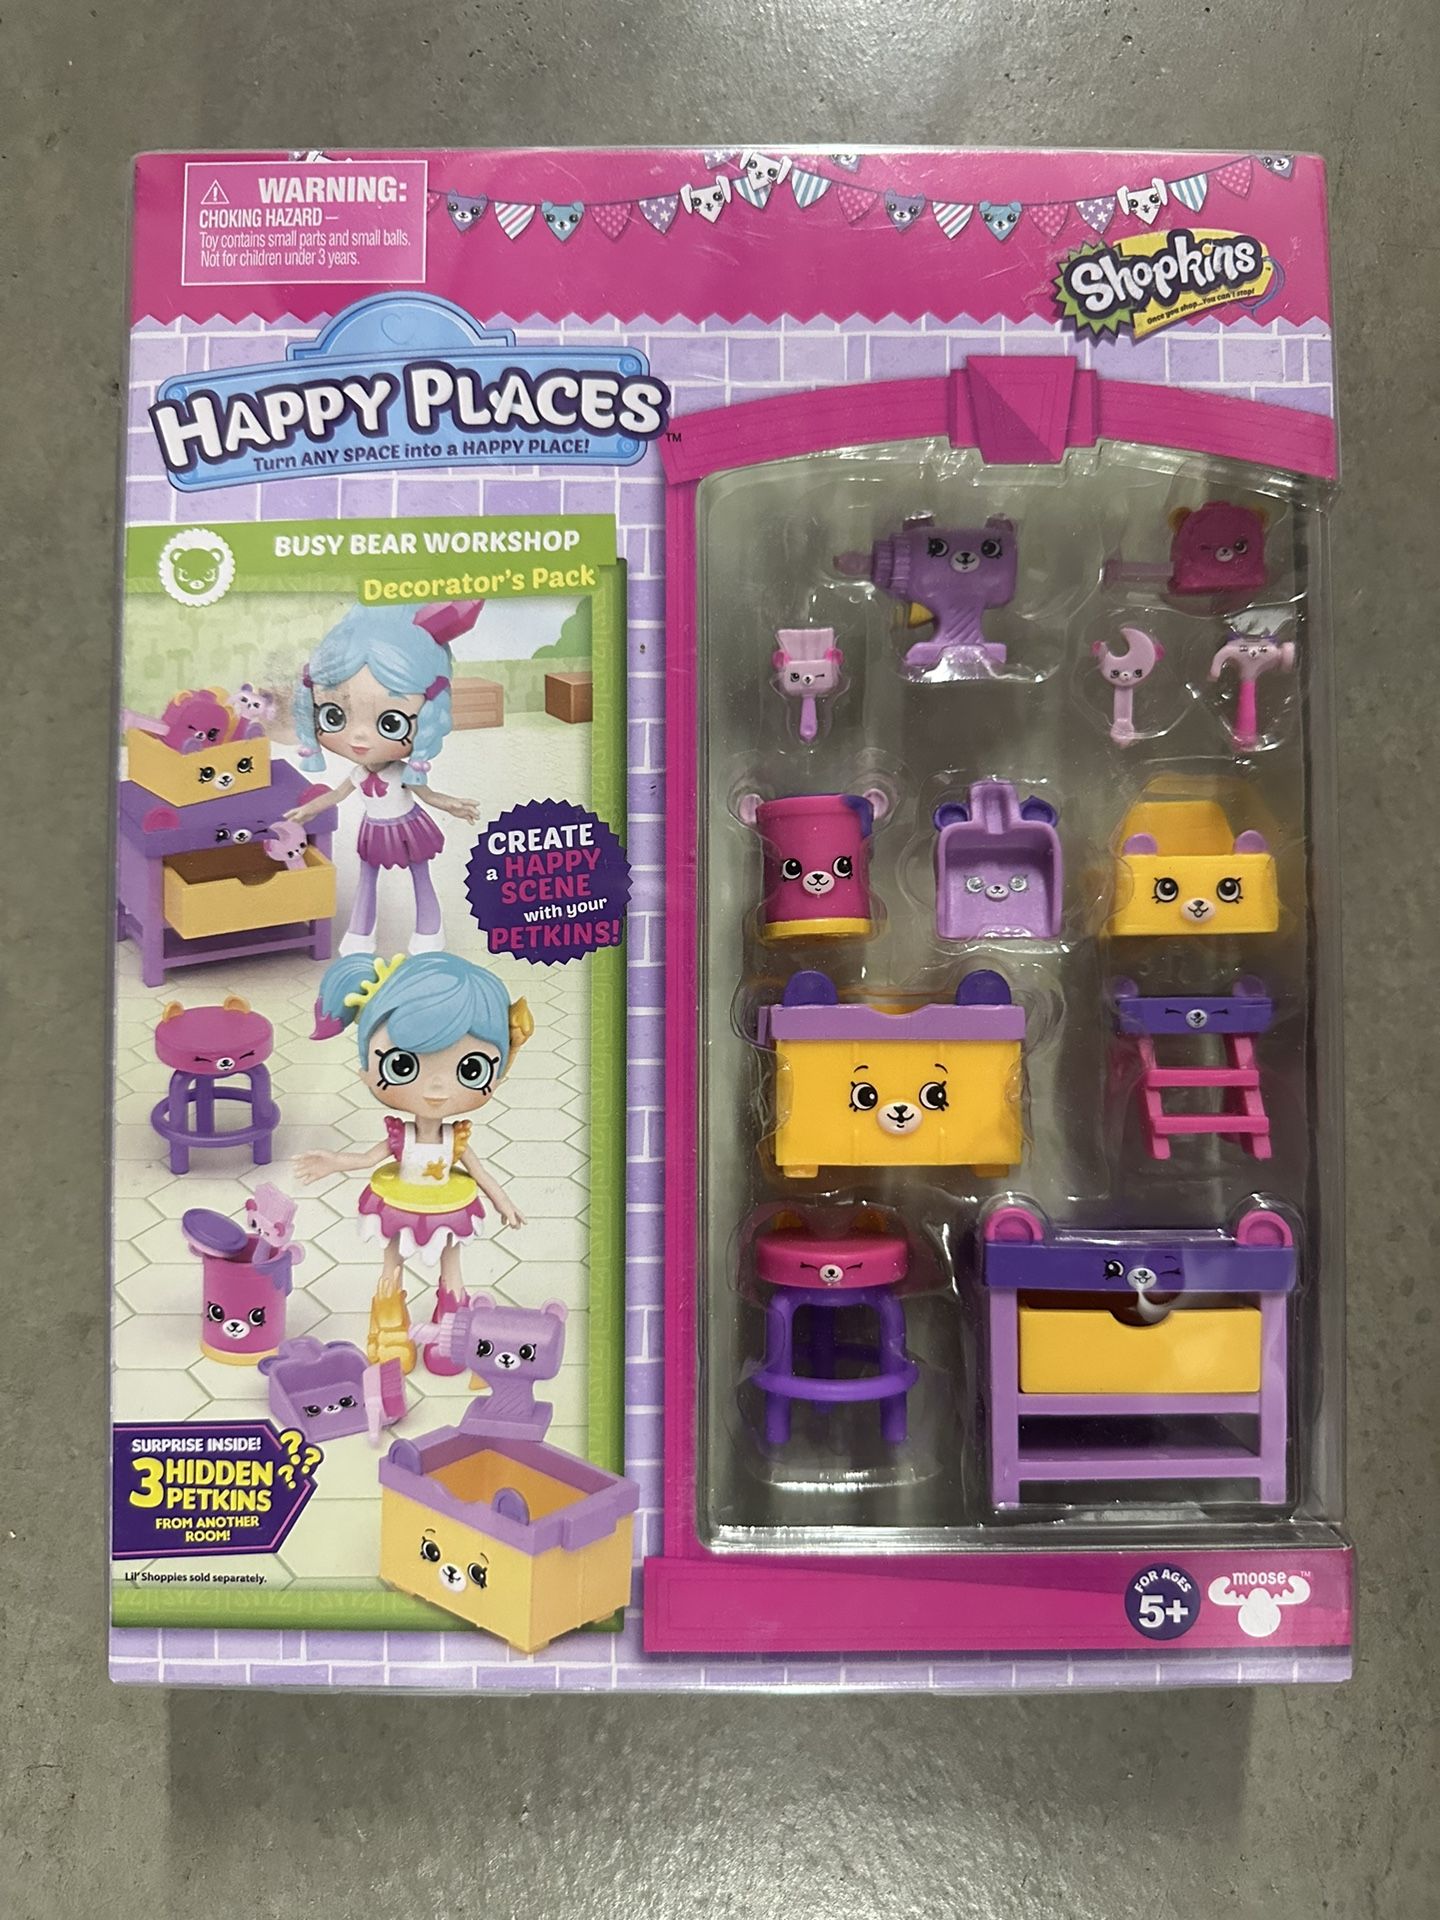 SHOPKINS HAPPY PLACES BUSY BEAR WORKSHOP DECORATOR’S PACK MOOSE TOYS